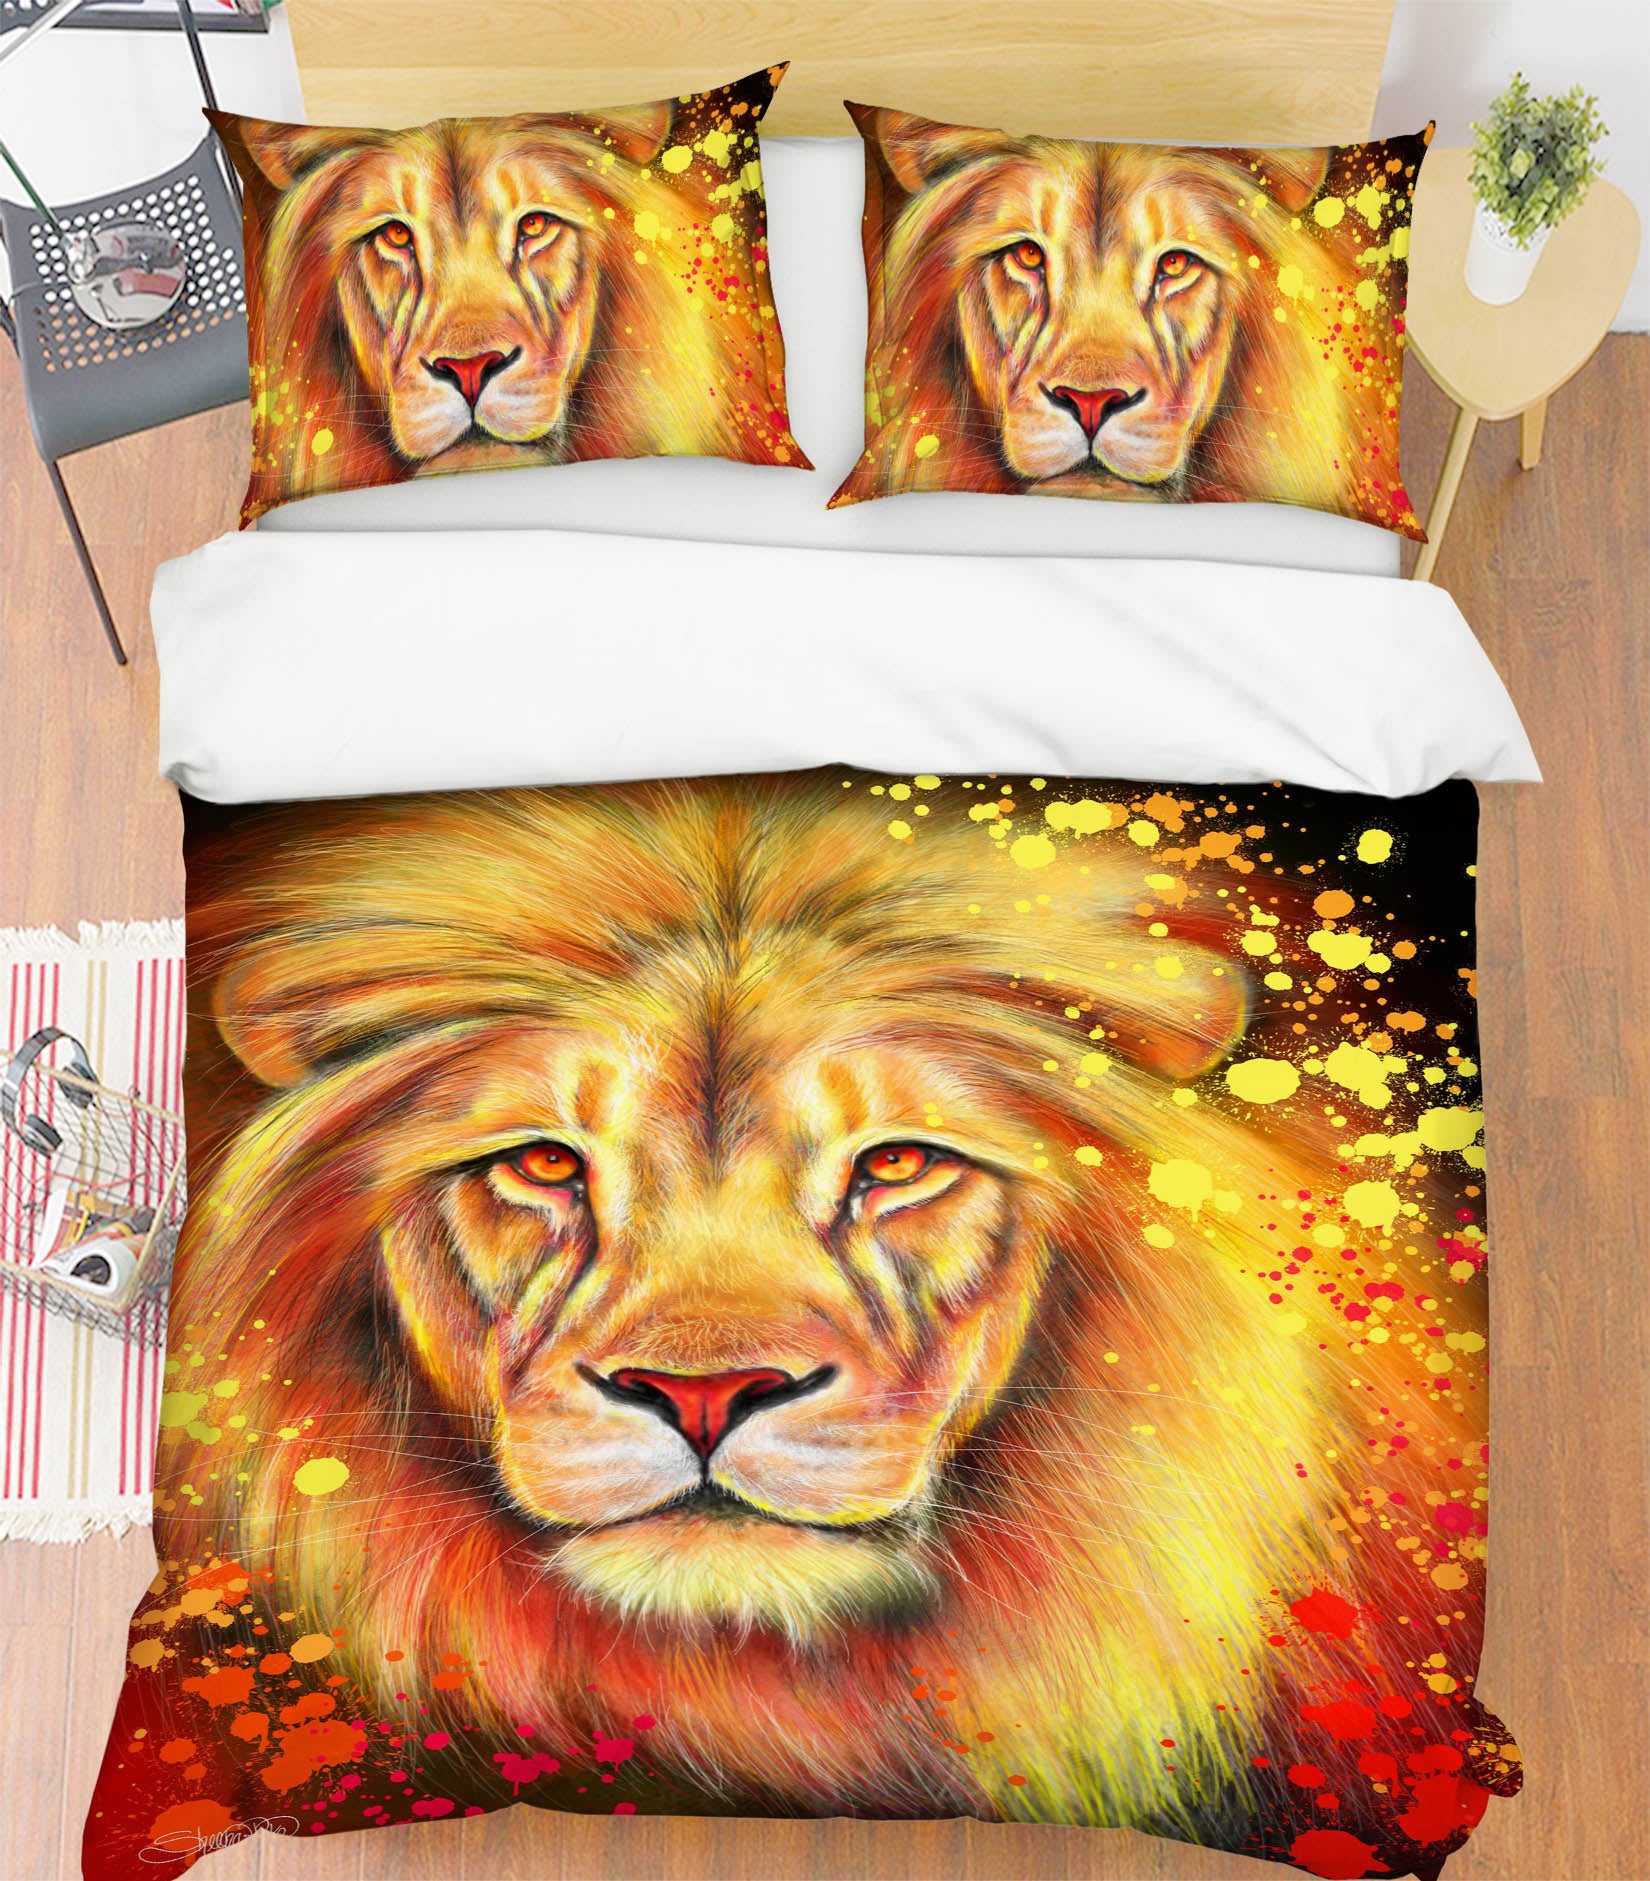 3D Watercolor Lion 8575 Sheena Pike Bedding Bed Pillowcases Quilt Cover Duvet Cover